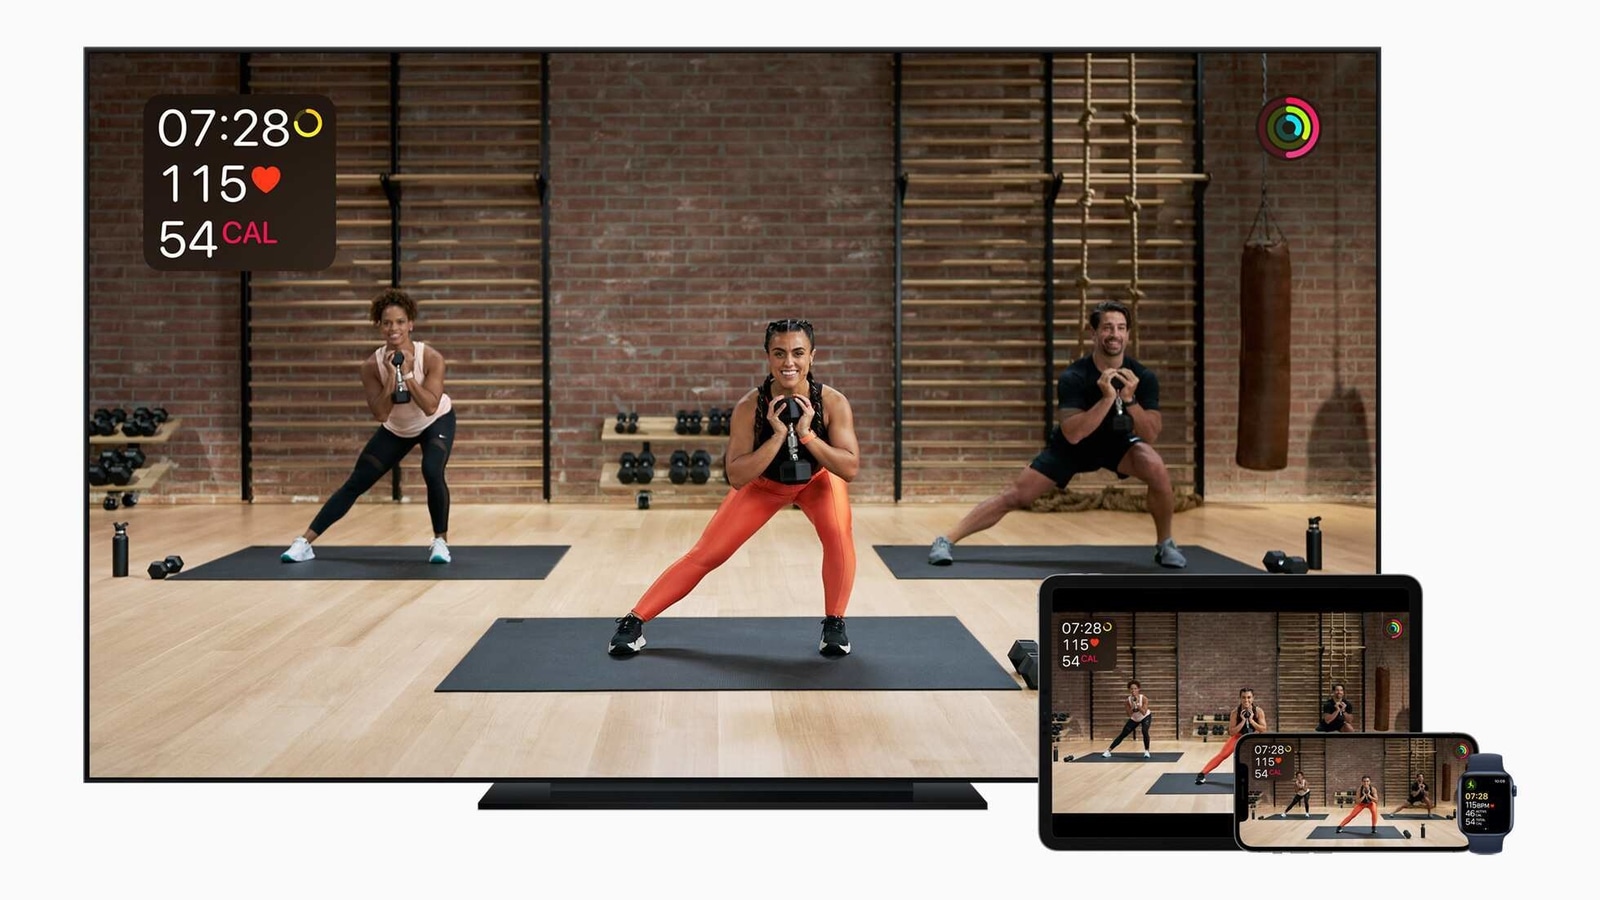 Apple Fitness+ is launching in December 14 Everything you need to know